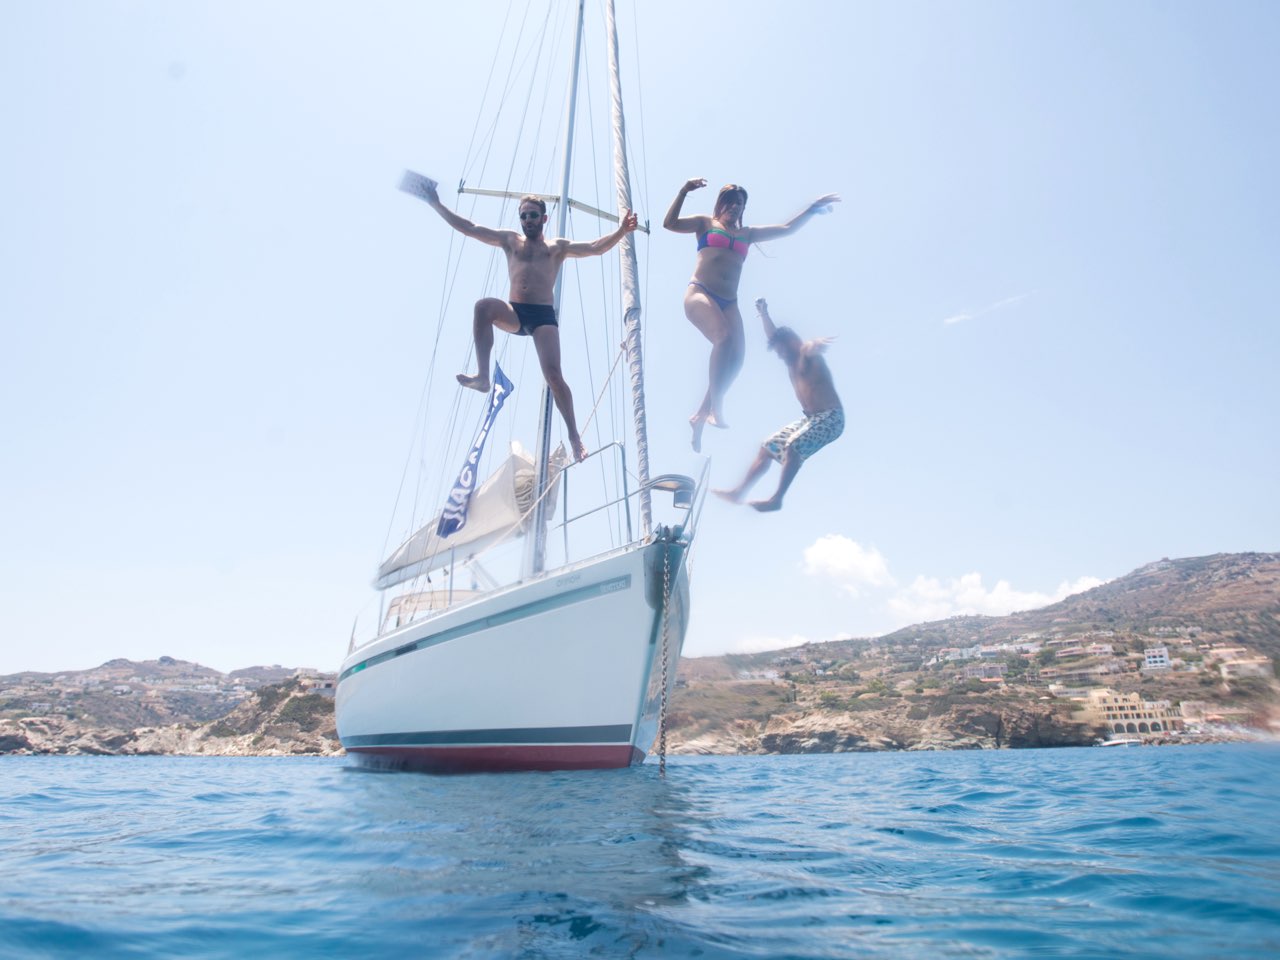 Culinary Experience, Day Sailing In Crete, sailing cruises heraklion Crete, best sailing trips heraklion crete, cooking and sailing crete, crete sailing tours acivities, things to do in heraklion, activities heraklion crete